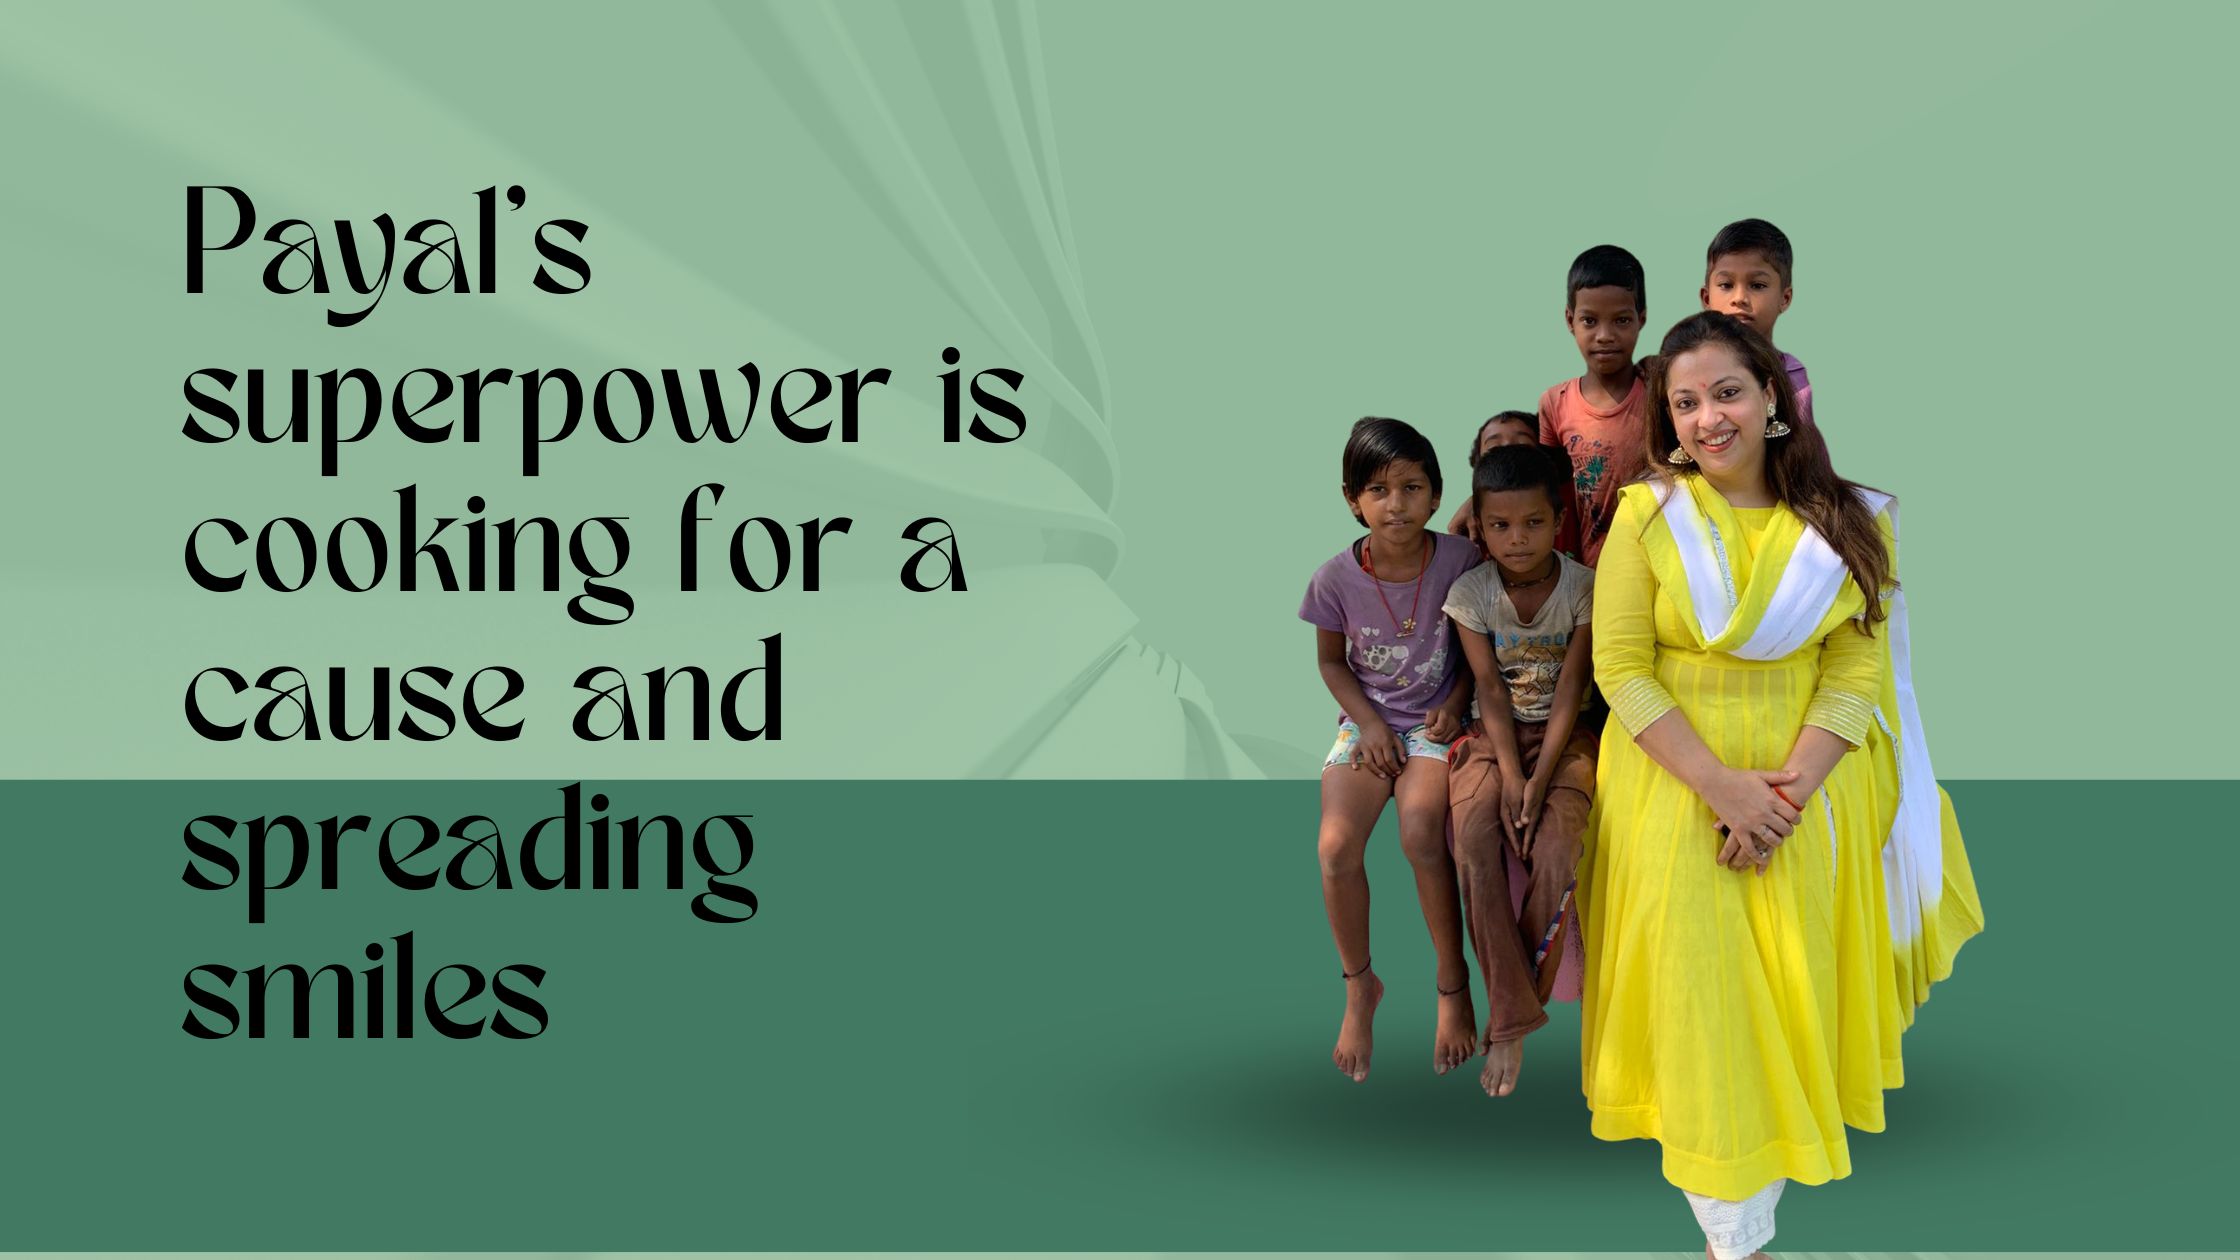 Payal’s amazing superpower is cooking for a cause and spreading smiles